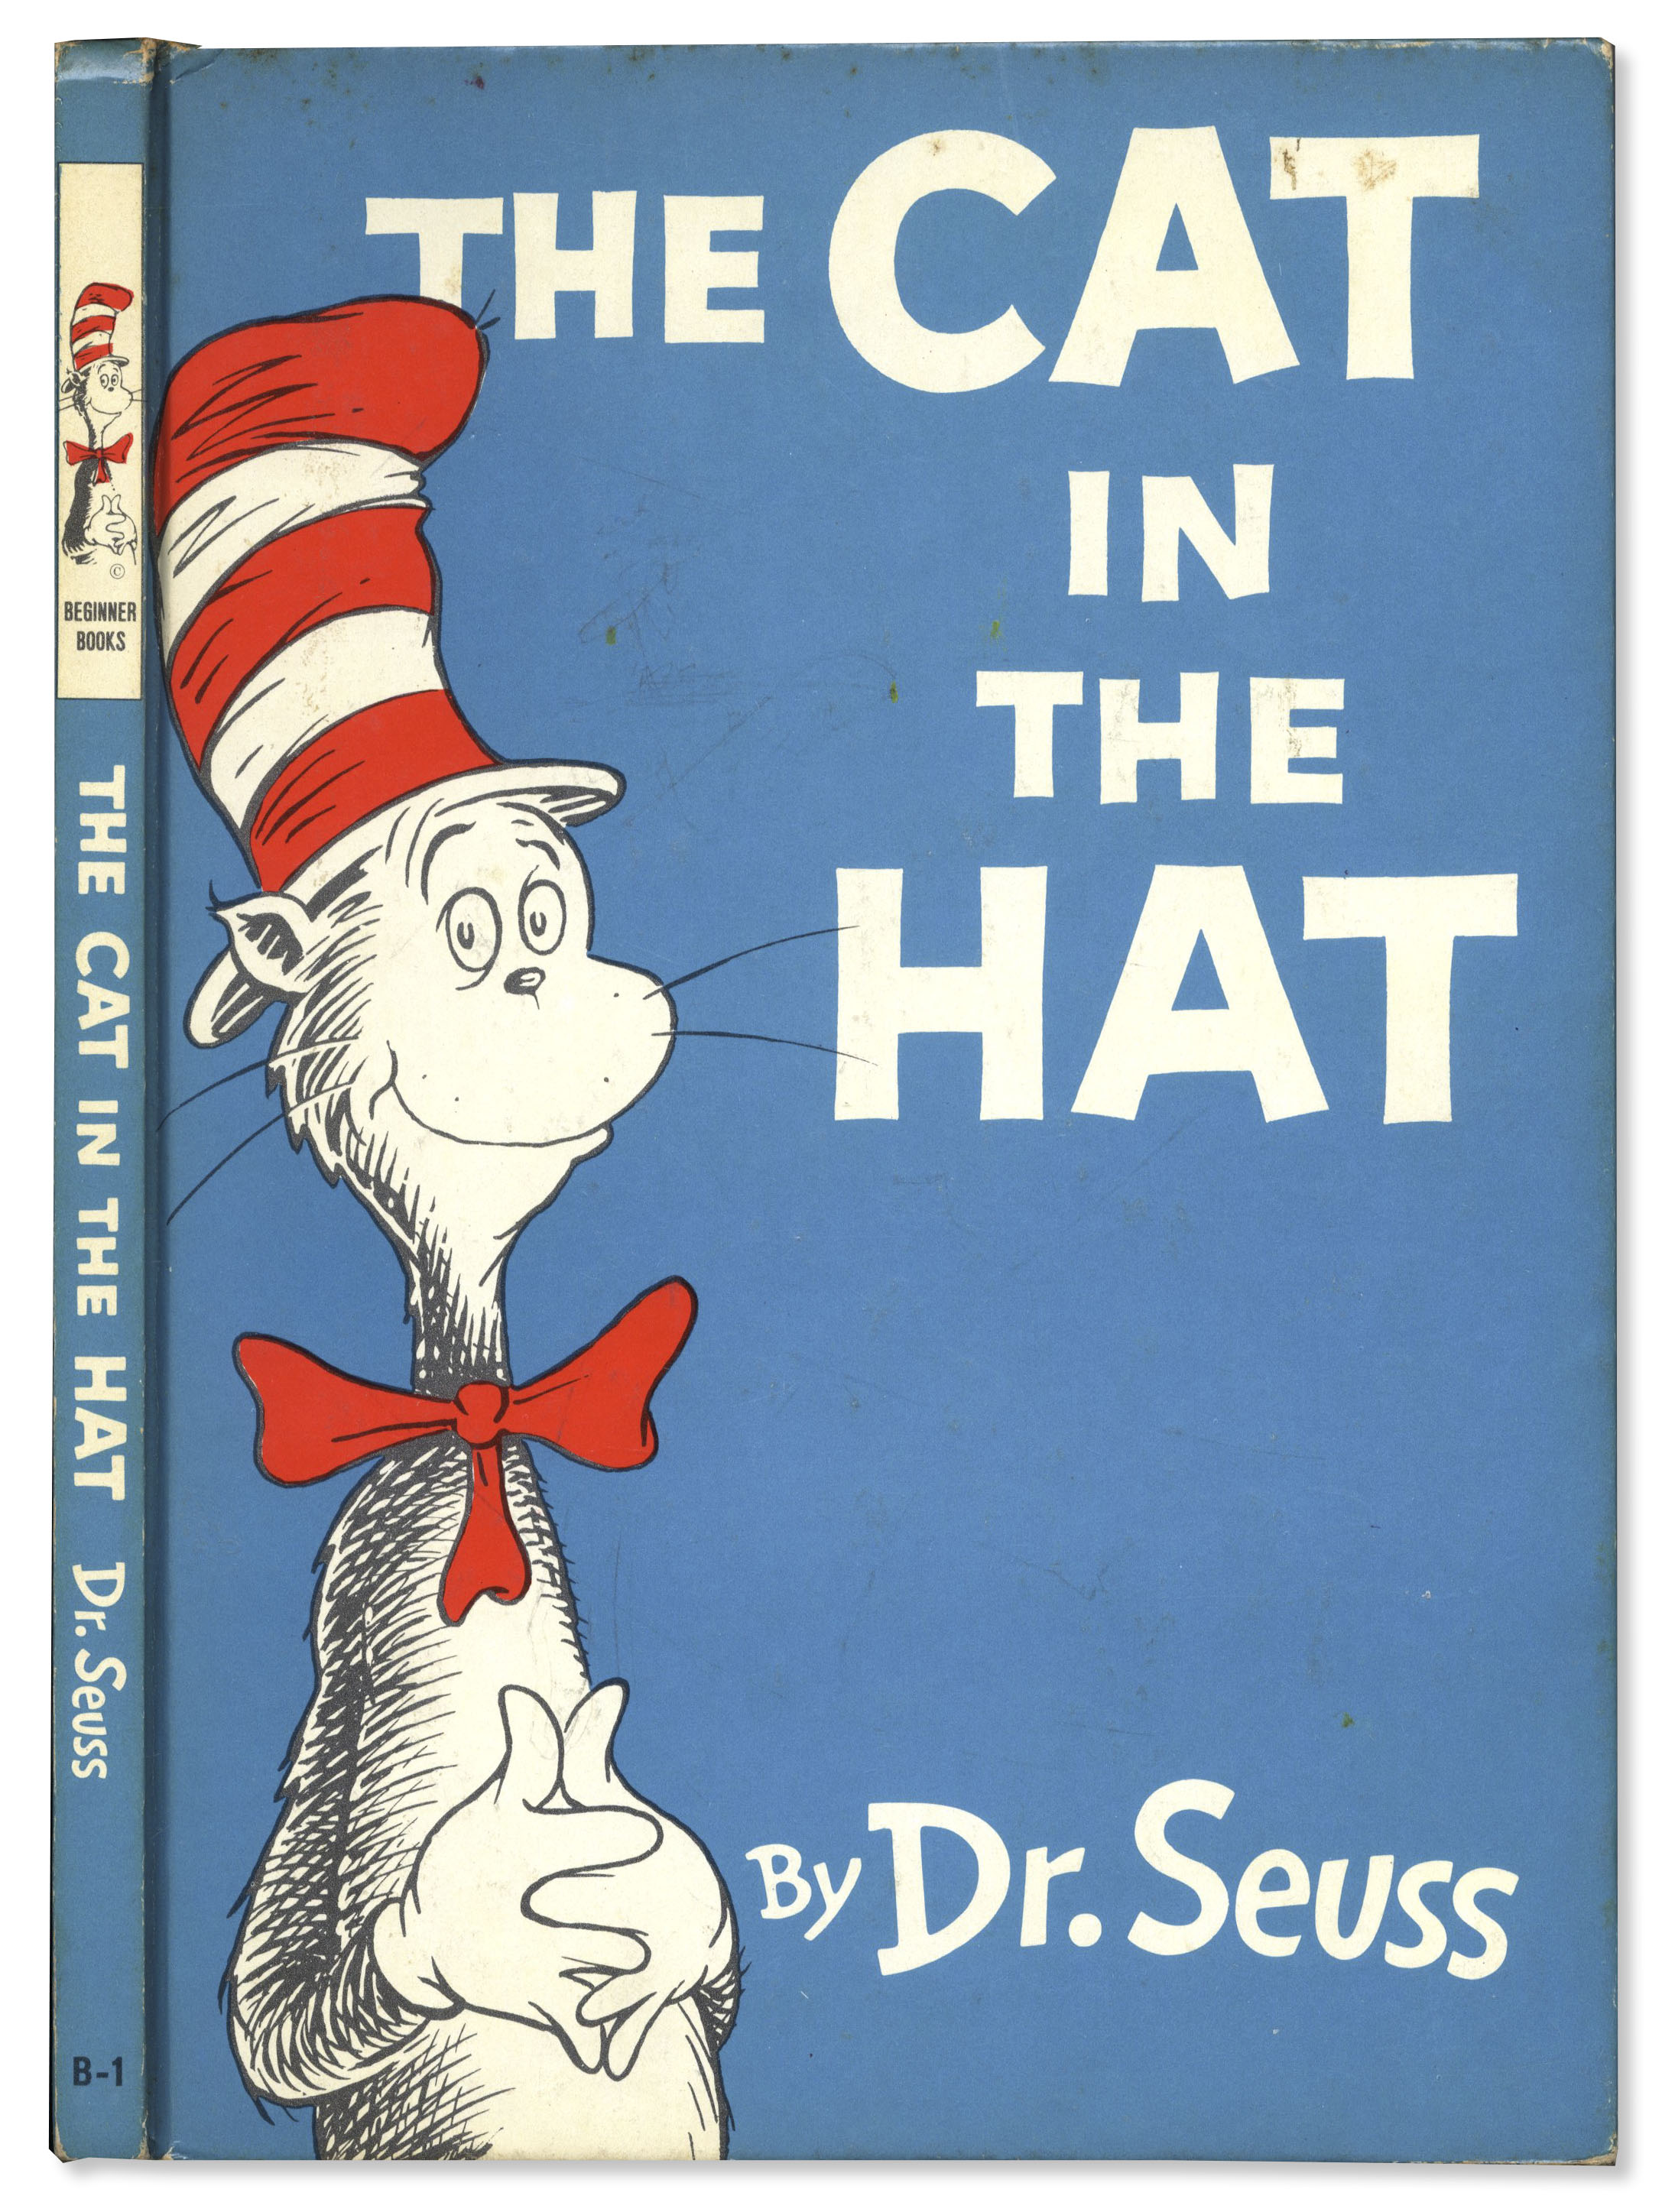 Dr Seuss Biography Creator Of The Cat In The Hat - vrogue.co